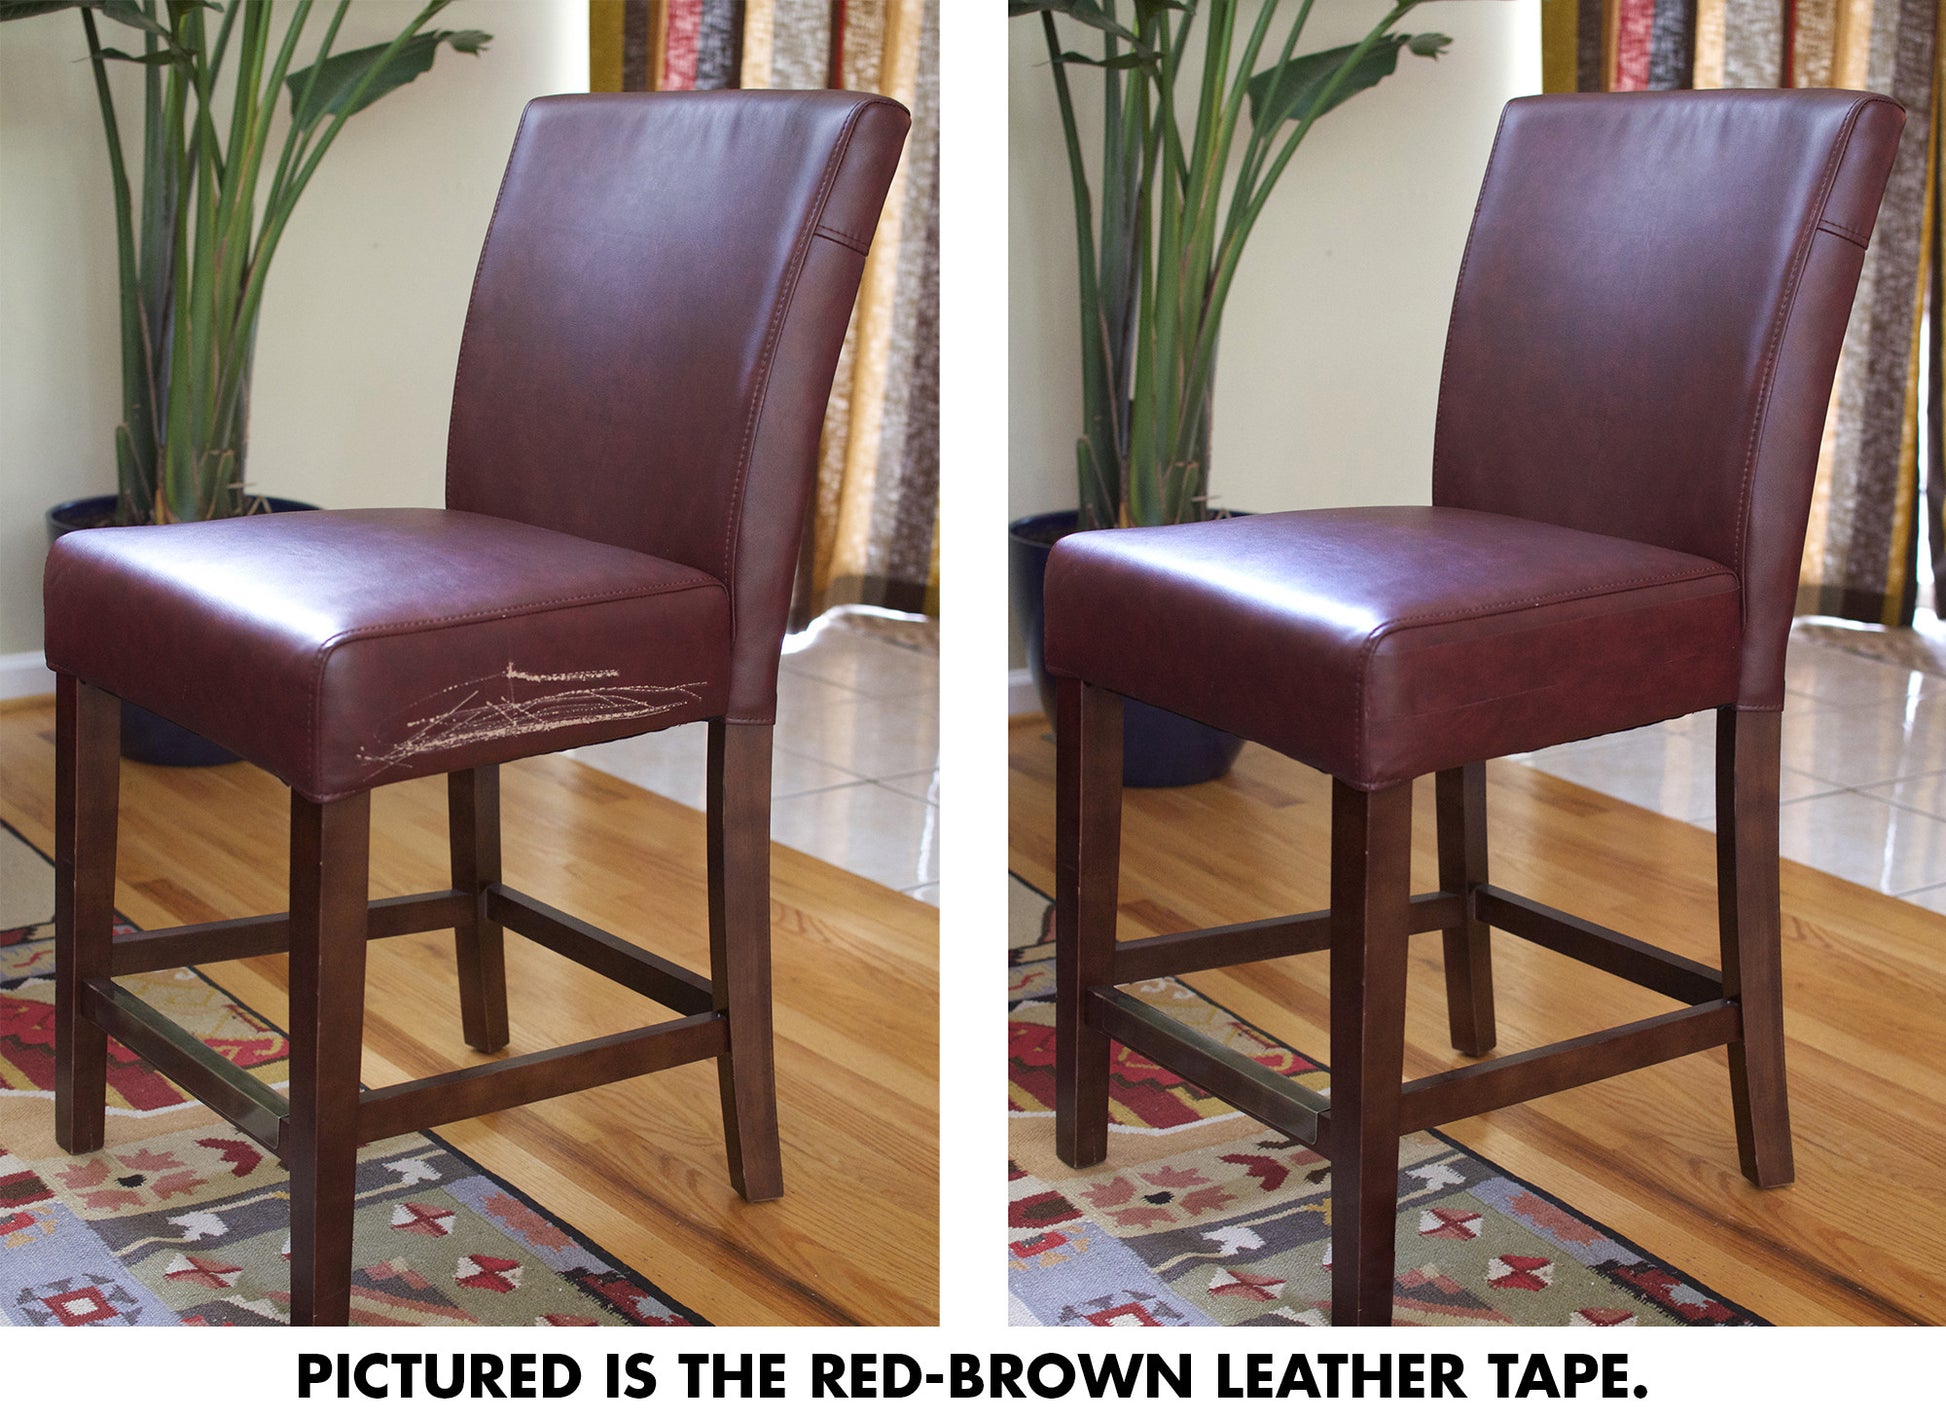 Match 'n Patch Realistic Dark Brown Leather Repair Tape